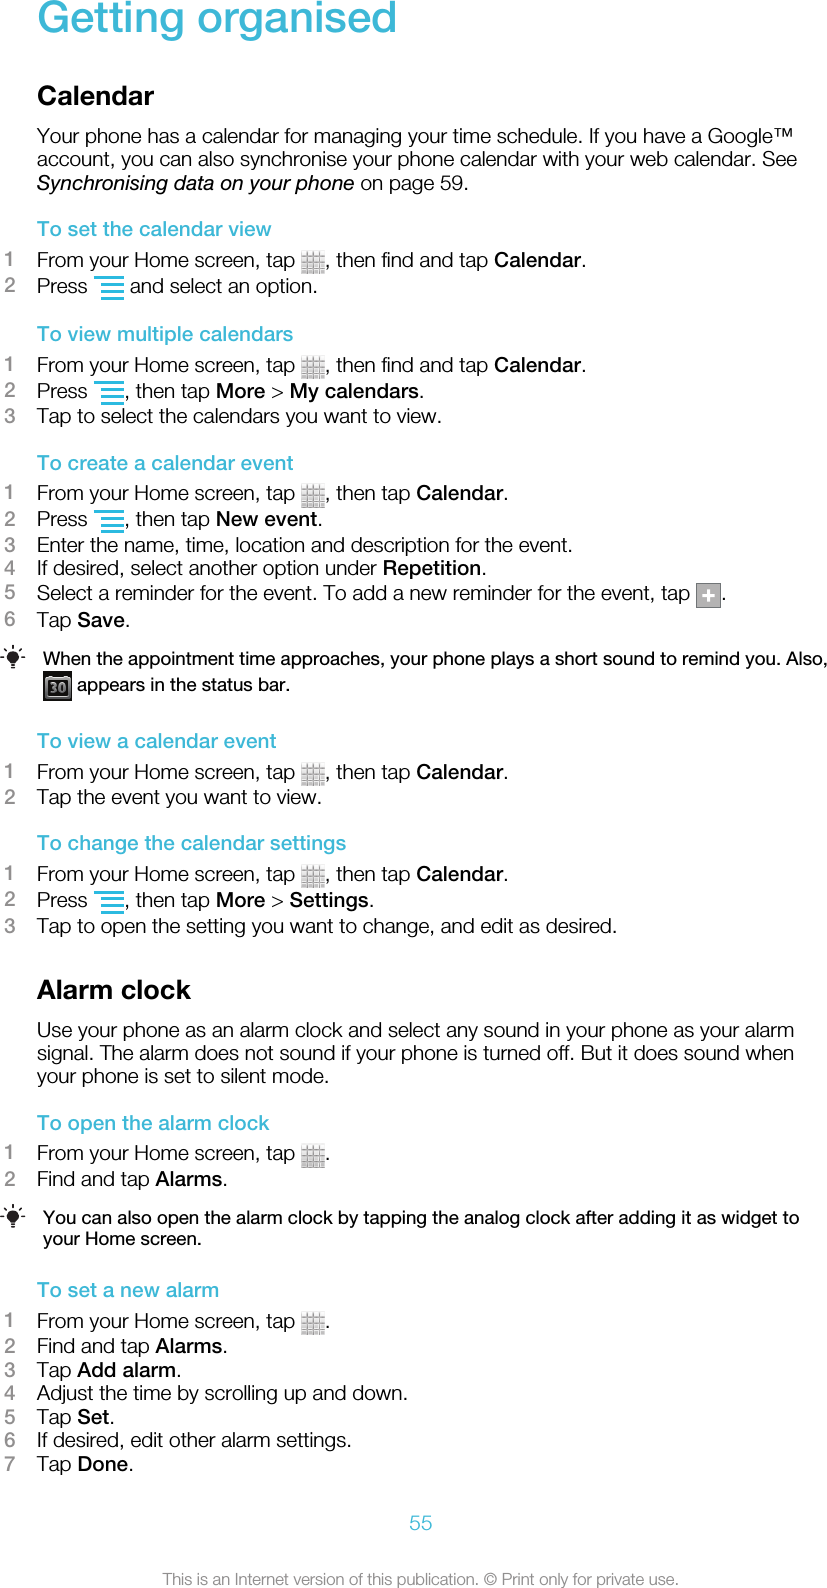 Getting organisedCalendarYour phone has a calendar for managing your time schedule. If you have a Google™account, you can also synchronise your phone calendar with your web calendar. SeeSynchronising data on your phone on page 59.To set the calendar view1From your Home screen, tap  , then find and tap Calendar.2Press   and select an option.To view multiple calendars1From your Home screen, tap  , then find and tap Calendar.2Press  , then tap More &gt; My calendars.3Tap to select the calendars you want to view.To create a calendar event1From your Home screen, tap  , then tap Calendar.2Press  , then tap New event.3Enter the name, time, location and description for the event.4If desired, select another option under Repetition.5Select a reminder for the event. To add a new reminder for the event, tap  .6Tap Save.When the appointment time approaches, your phone plays a short sound to remind you. Also, appears in the status bar.To view a calendar event1From your Home screen, tap  , then tap Calendar.2Tap the event you want to view.To change the calendar settings1From your Home screen, tap  , then tap Calendar.2Press  , then tap More &gt; Settings.3Tap to open the setting you want to change, and edit as desired.Alarm clockUse your phone as an alarm clock and select any sound in your phone as your alarmsignal. The alarm does not sound if your phone is turned off. But it does sound whenyour phone is set to silent mode.To open the alarm clock1From your Home screen, tap  .2Find and tap Alarms.You can also open the alarm clock by tapping the analog clock after adding it as widget toyour Home screen.To set a new alarm1From your Home screen, tap  .2Find and tap Alarms.3Tap Add alarm.4Adjust the time by scrolling up and down.5Tap Set.6If desired, edit other alarm settings.7Tap Done.55This is an Internet version of this publication. © Print only for private use.